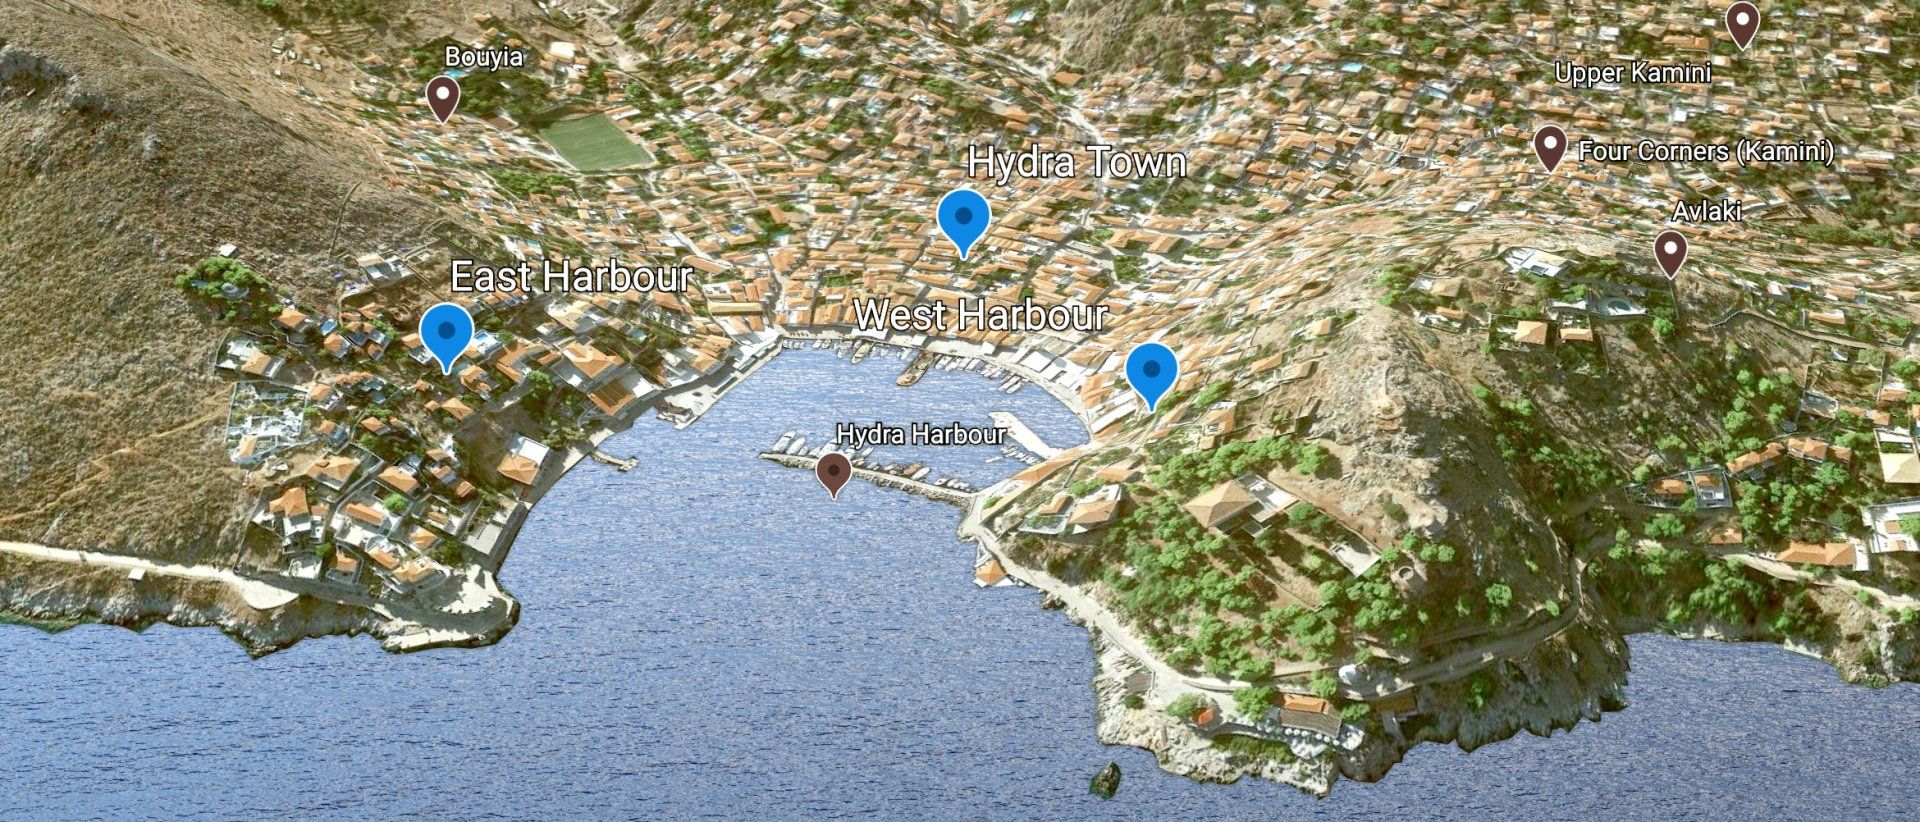 Map of Hydra Town and the East and West harbour on Hydra Island Greece.